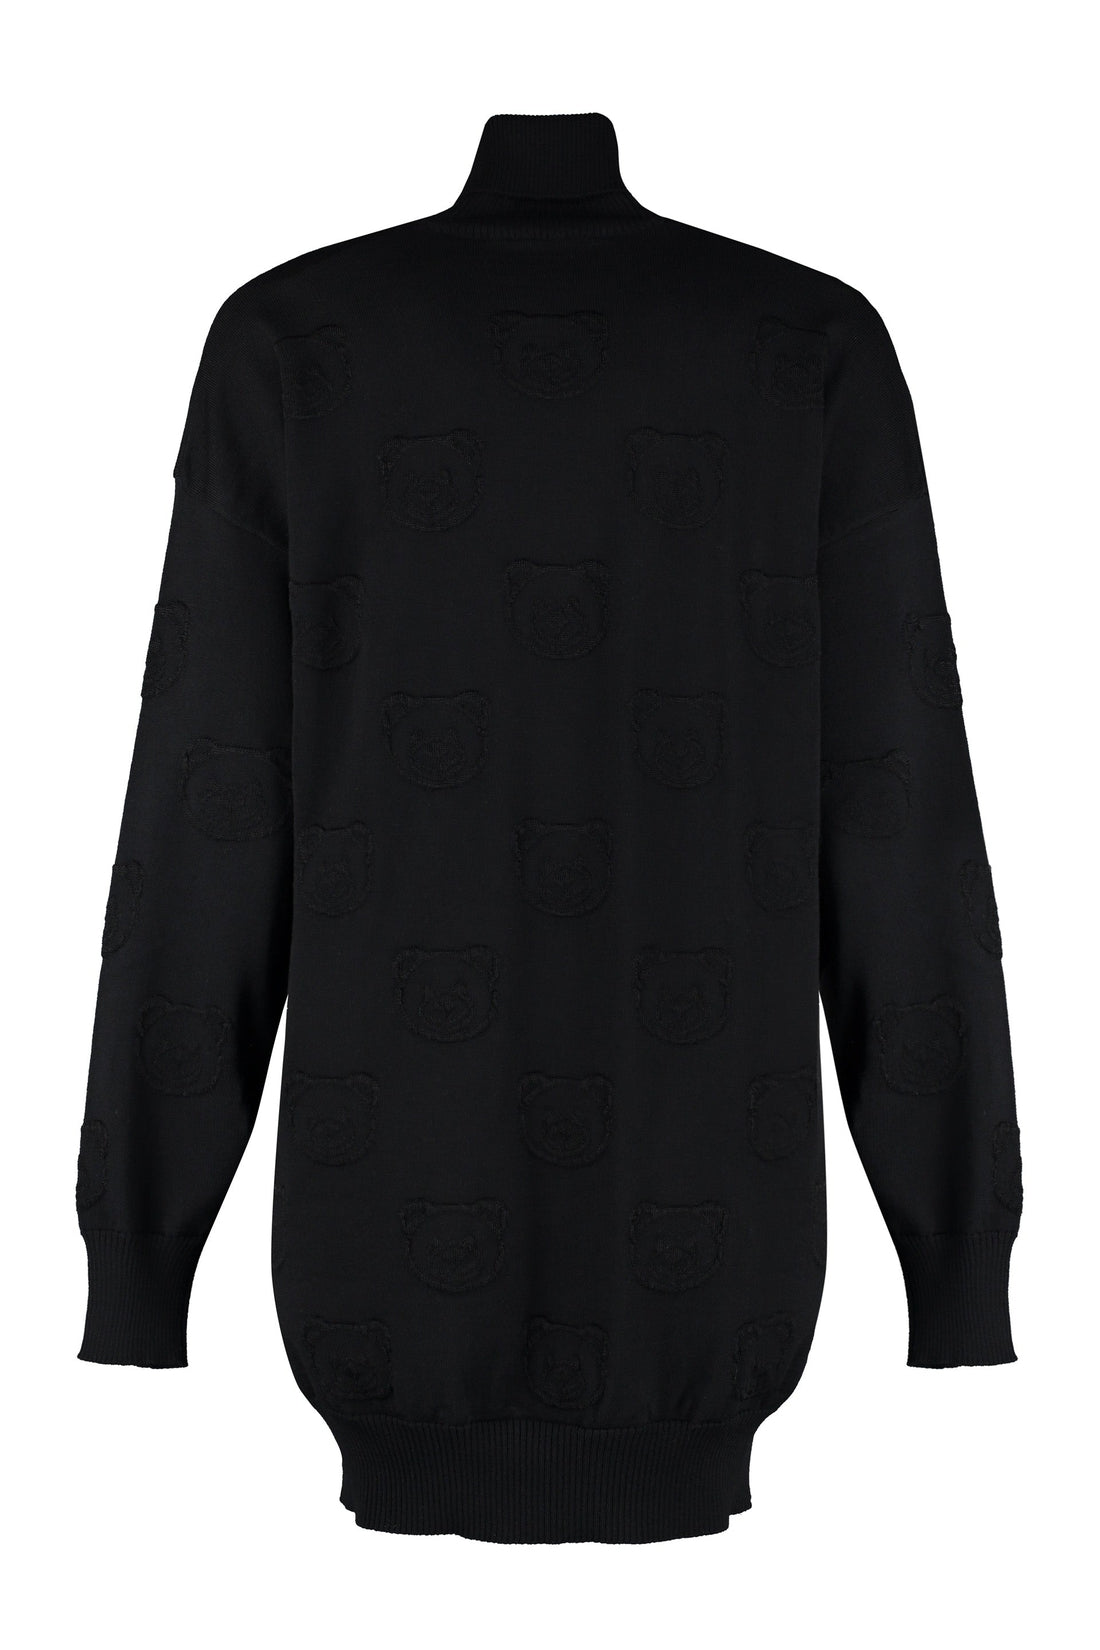 Moschino-OUTLET-SALE-Jacquard sweater dress-ARCHIVIST